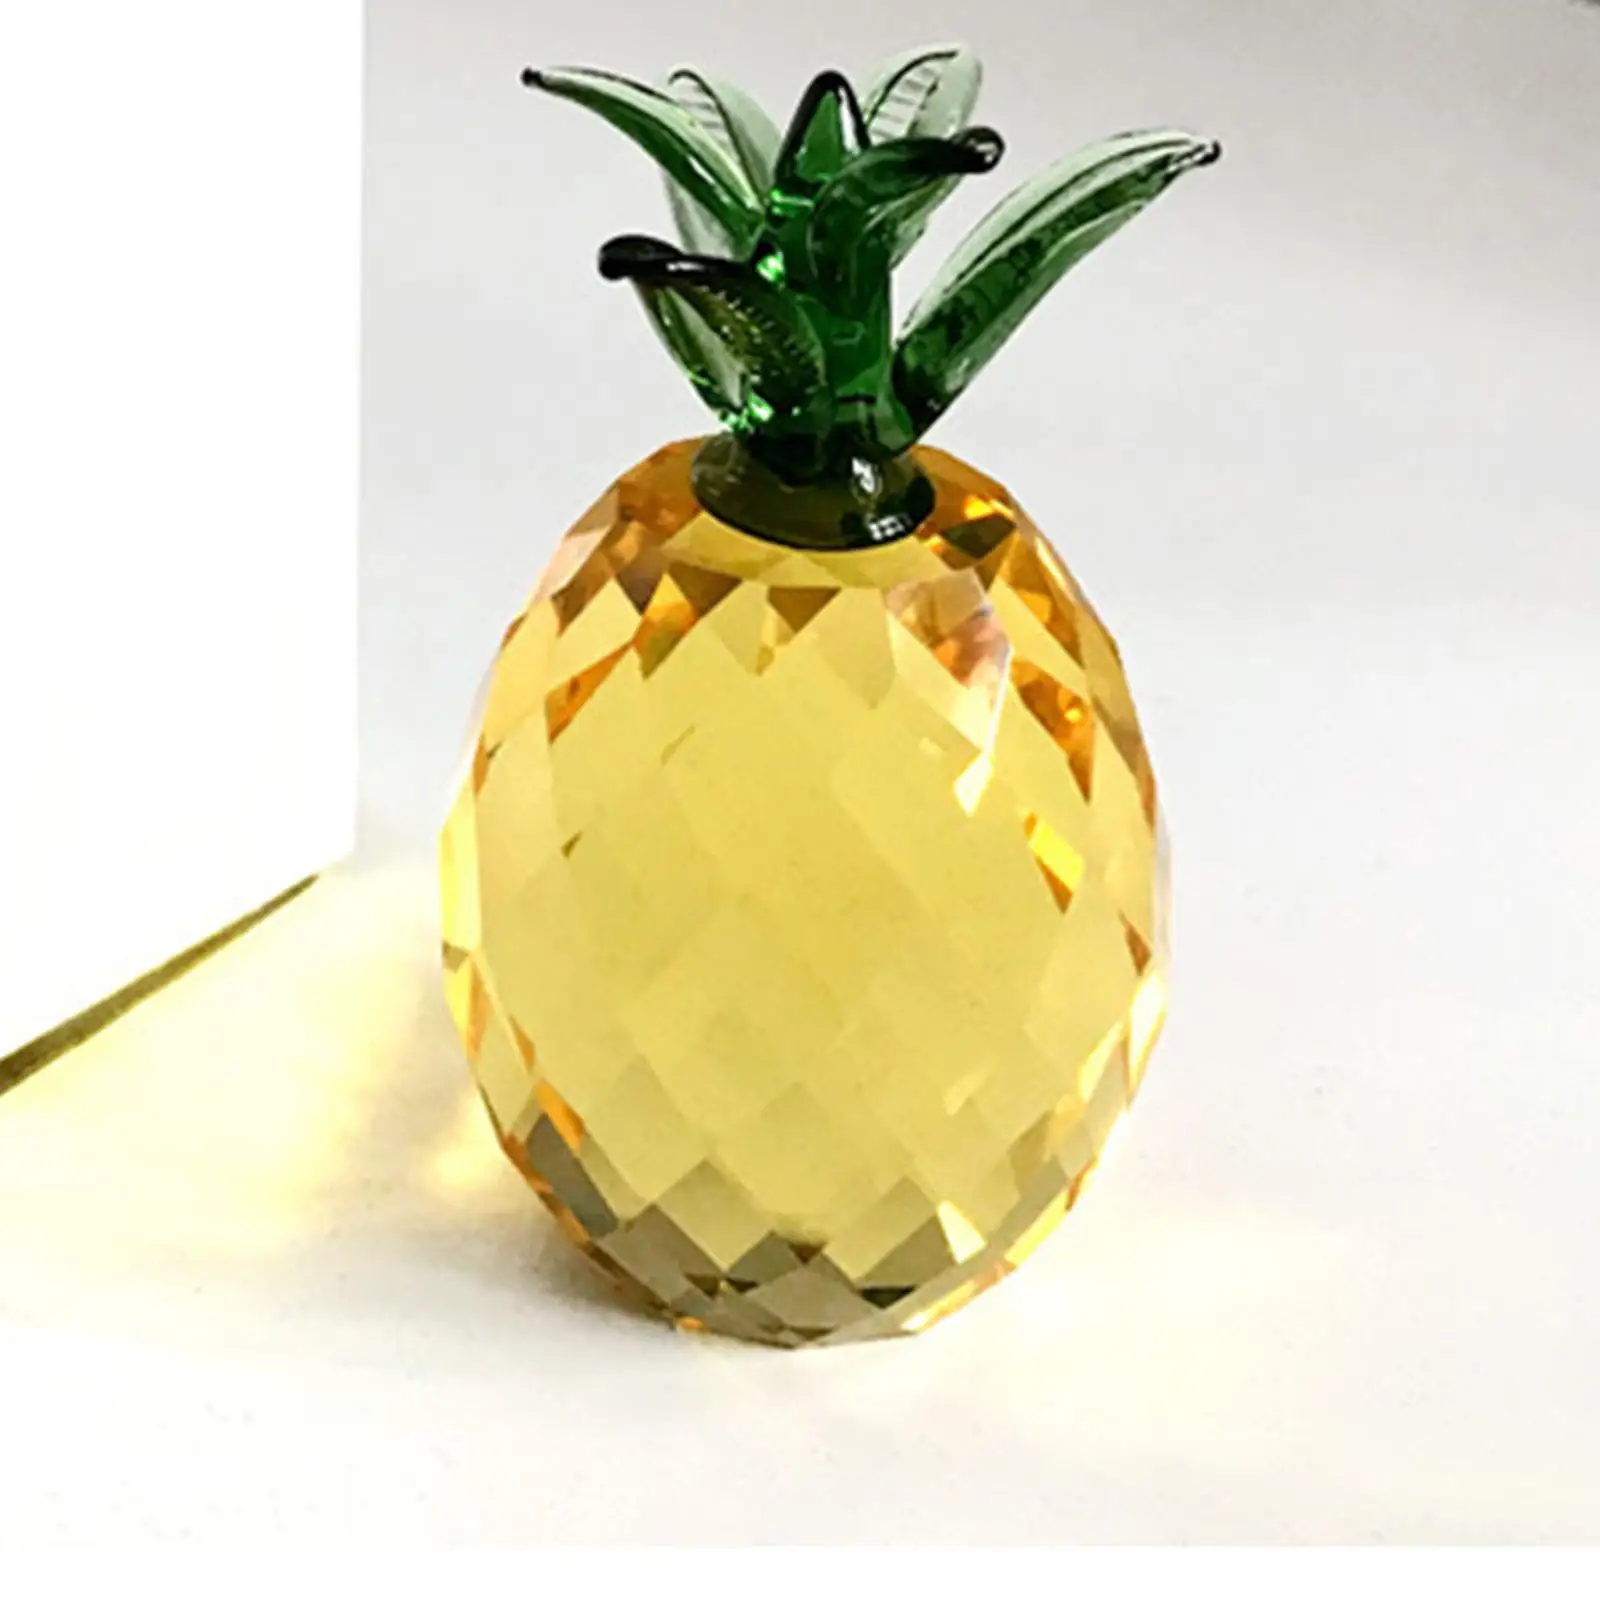 Pineapple Fruits Ornament Gift Wedding Decoration Office